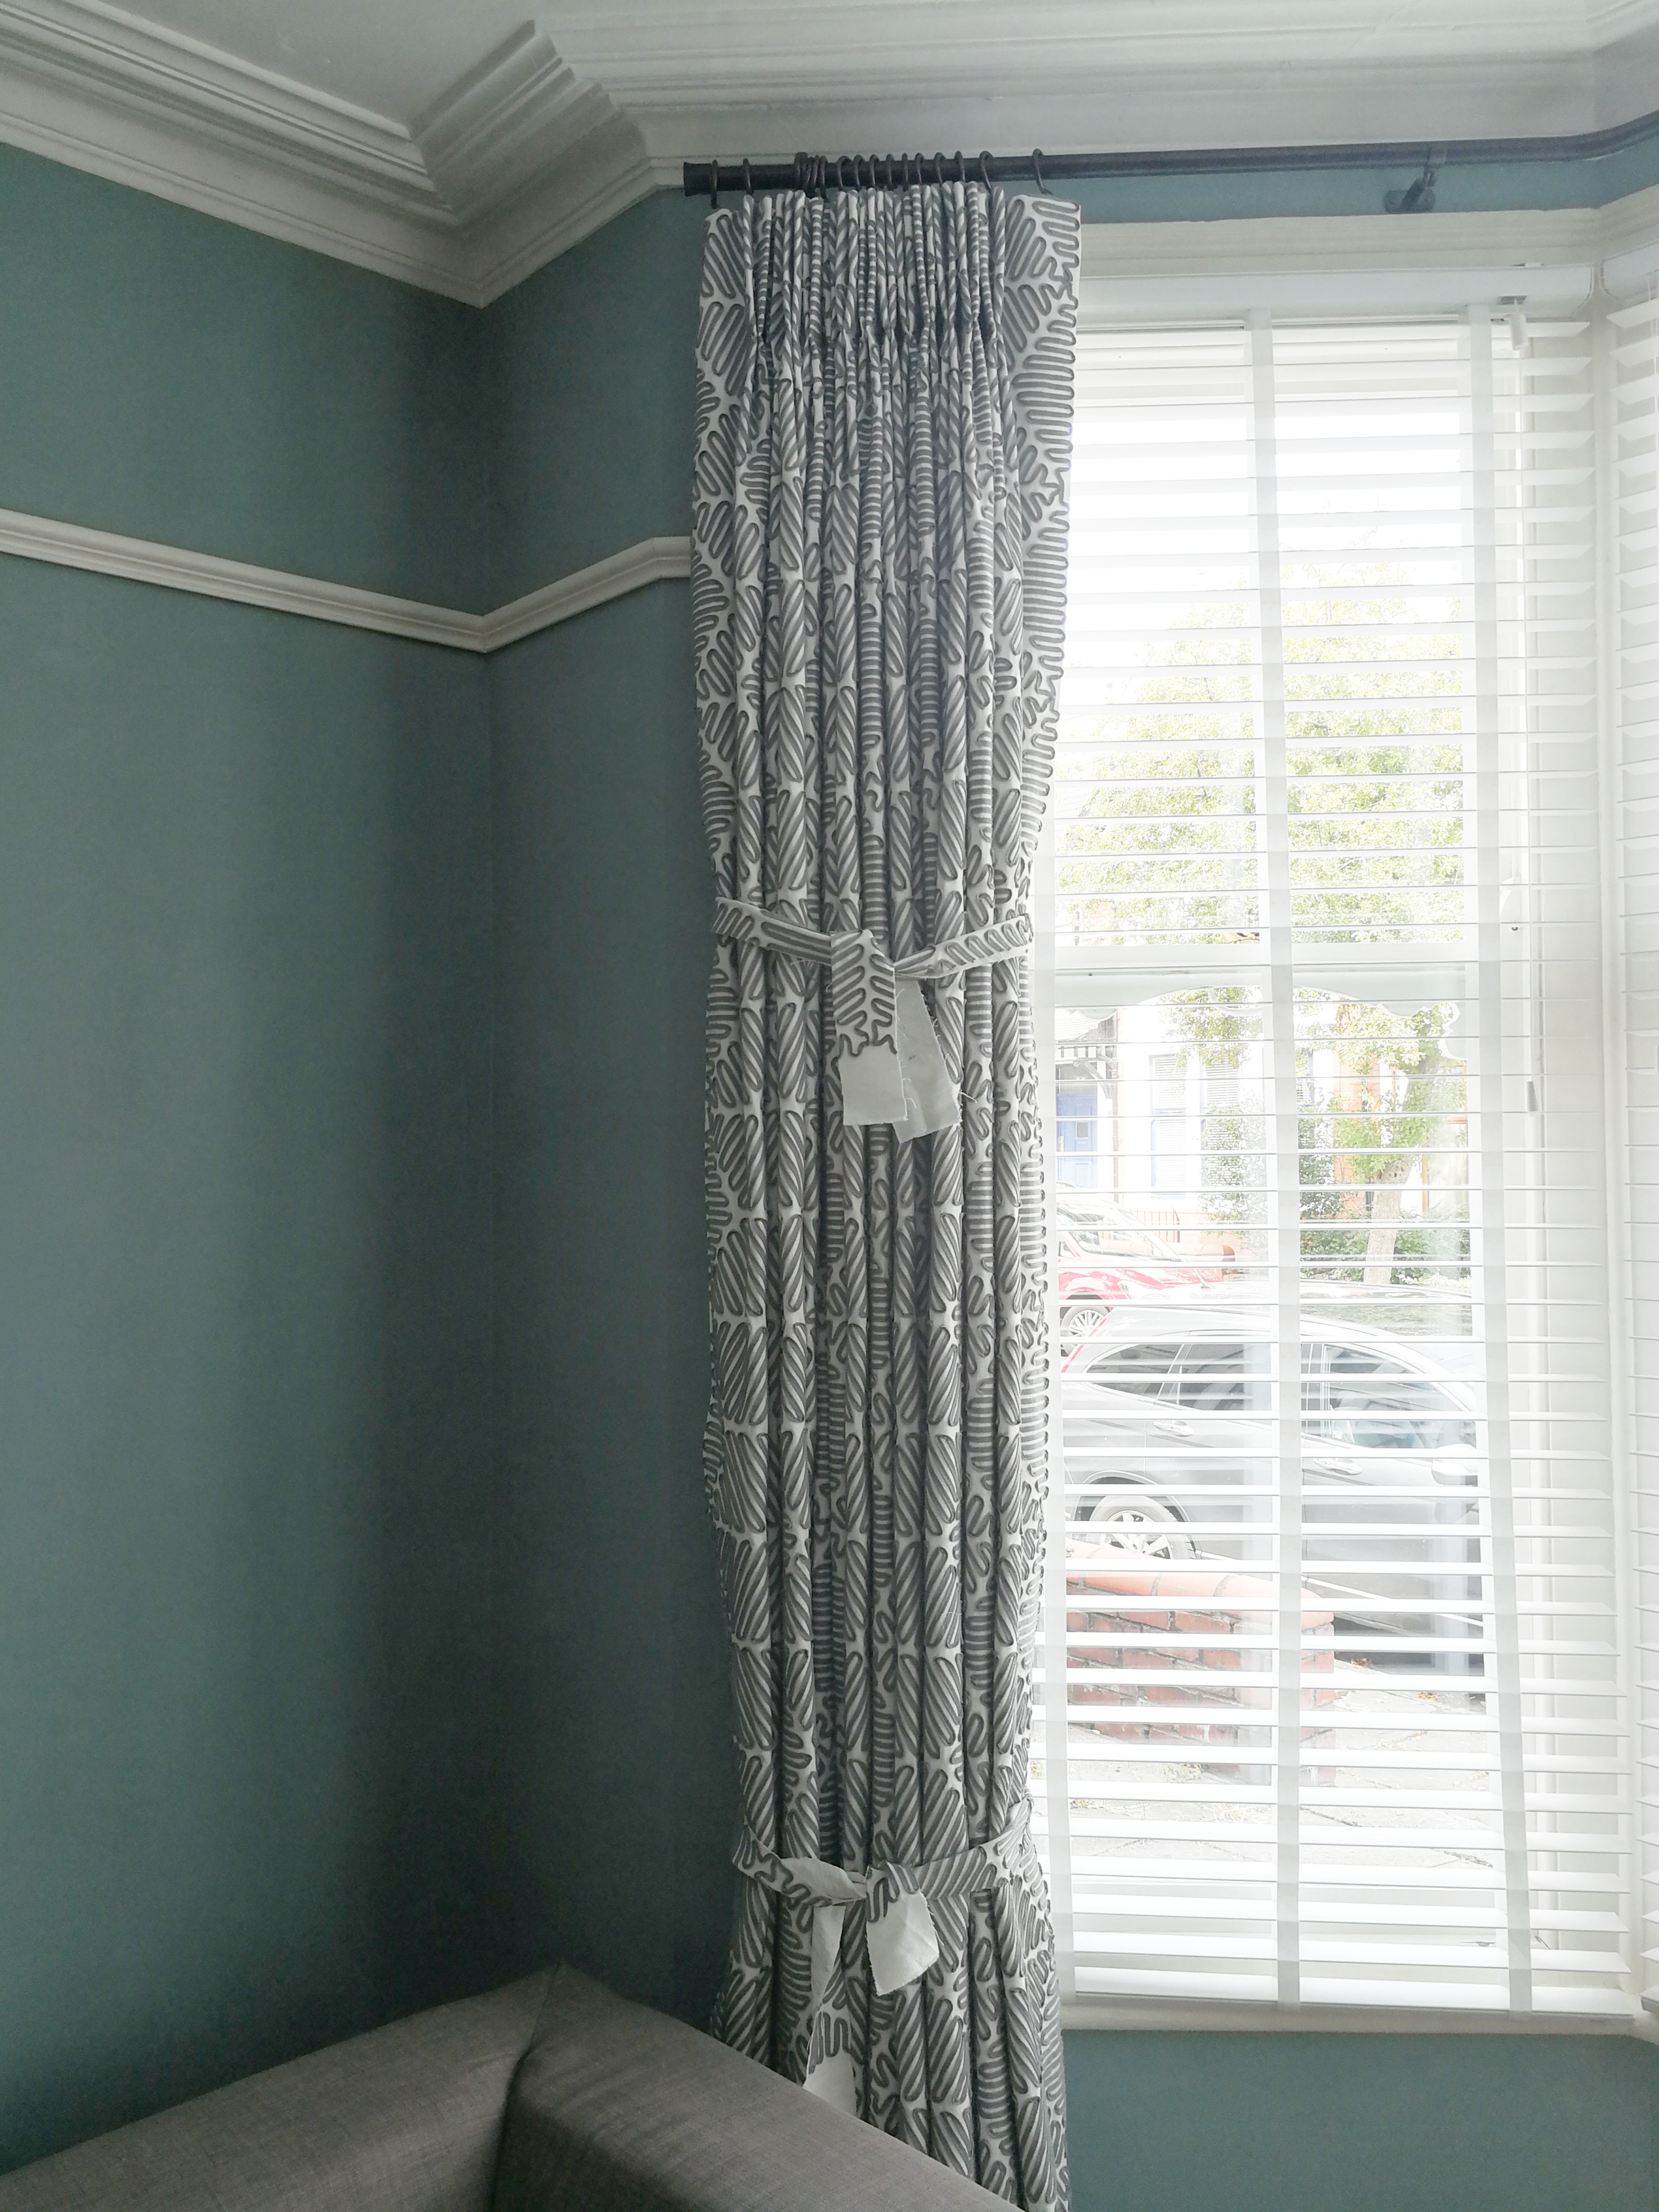 A photo of my curtains tied up in two places with fabric offcuts.